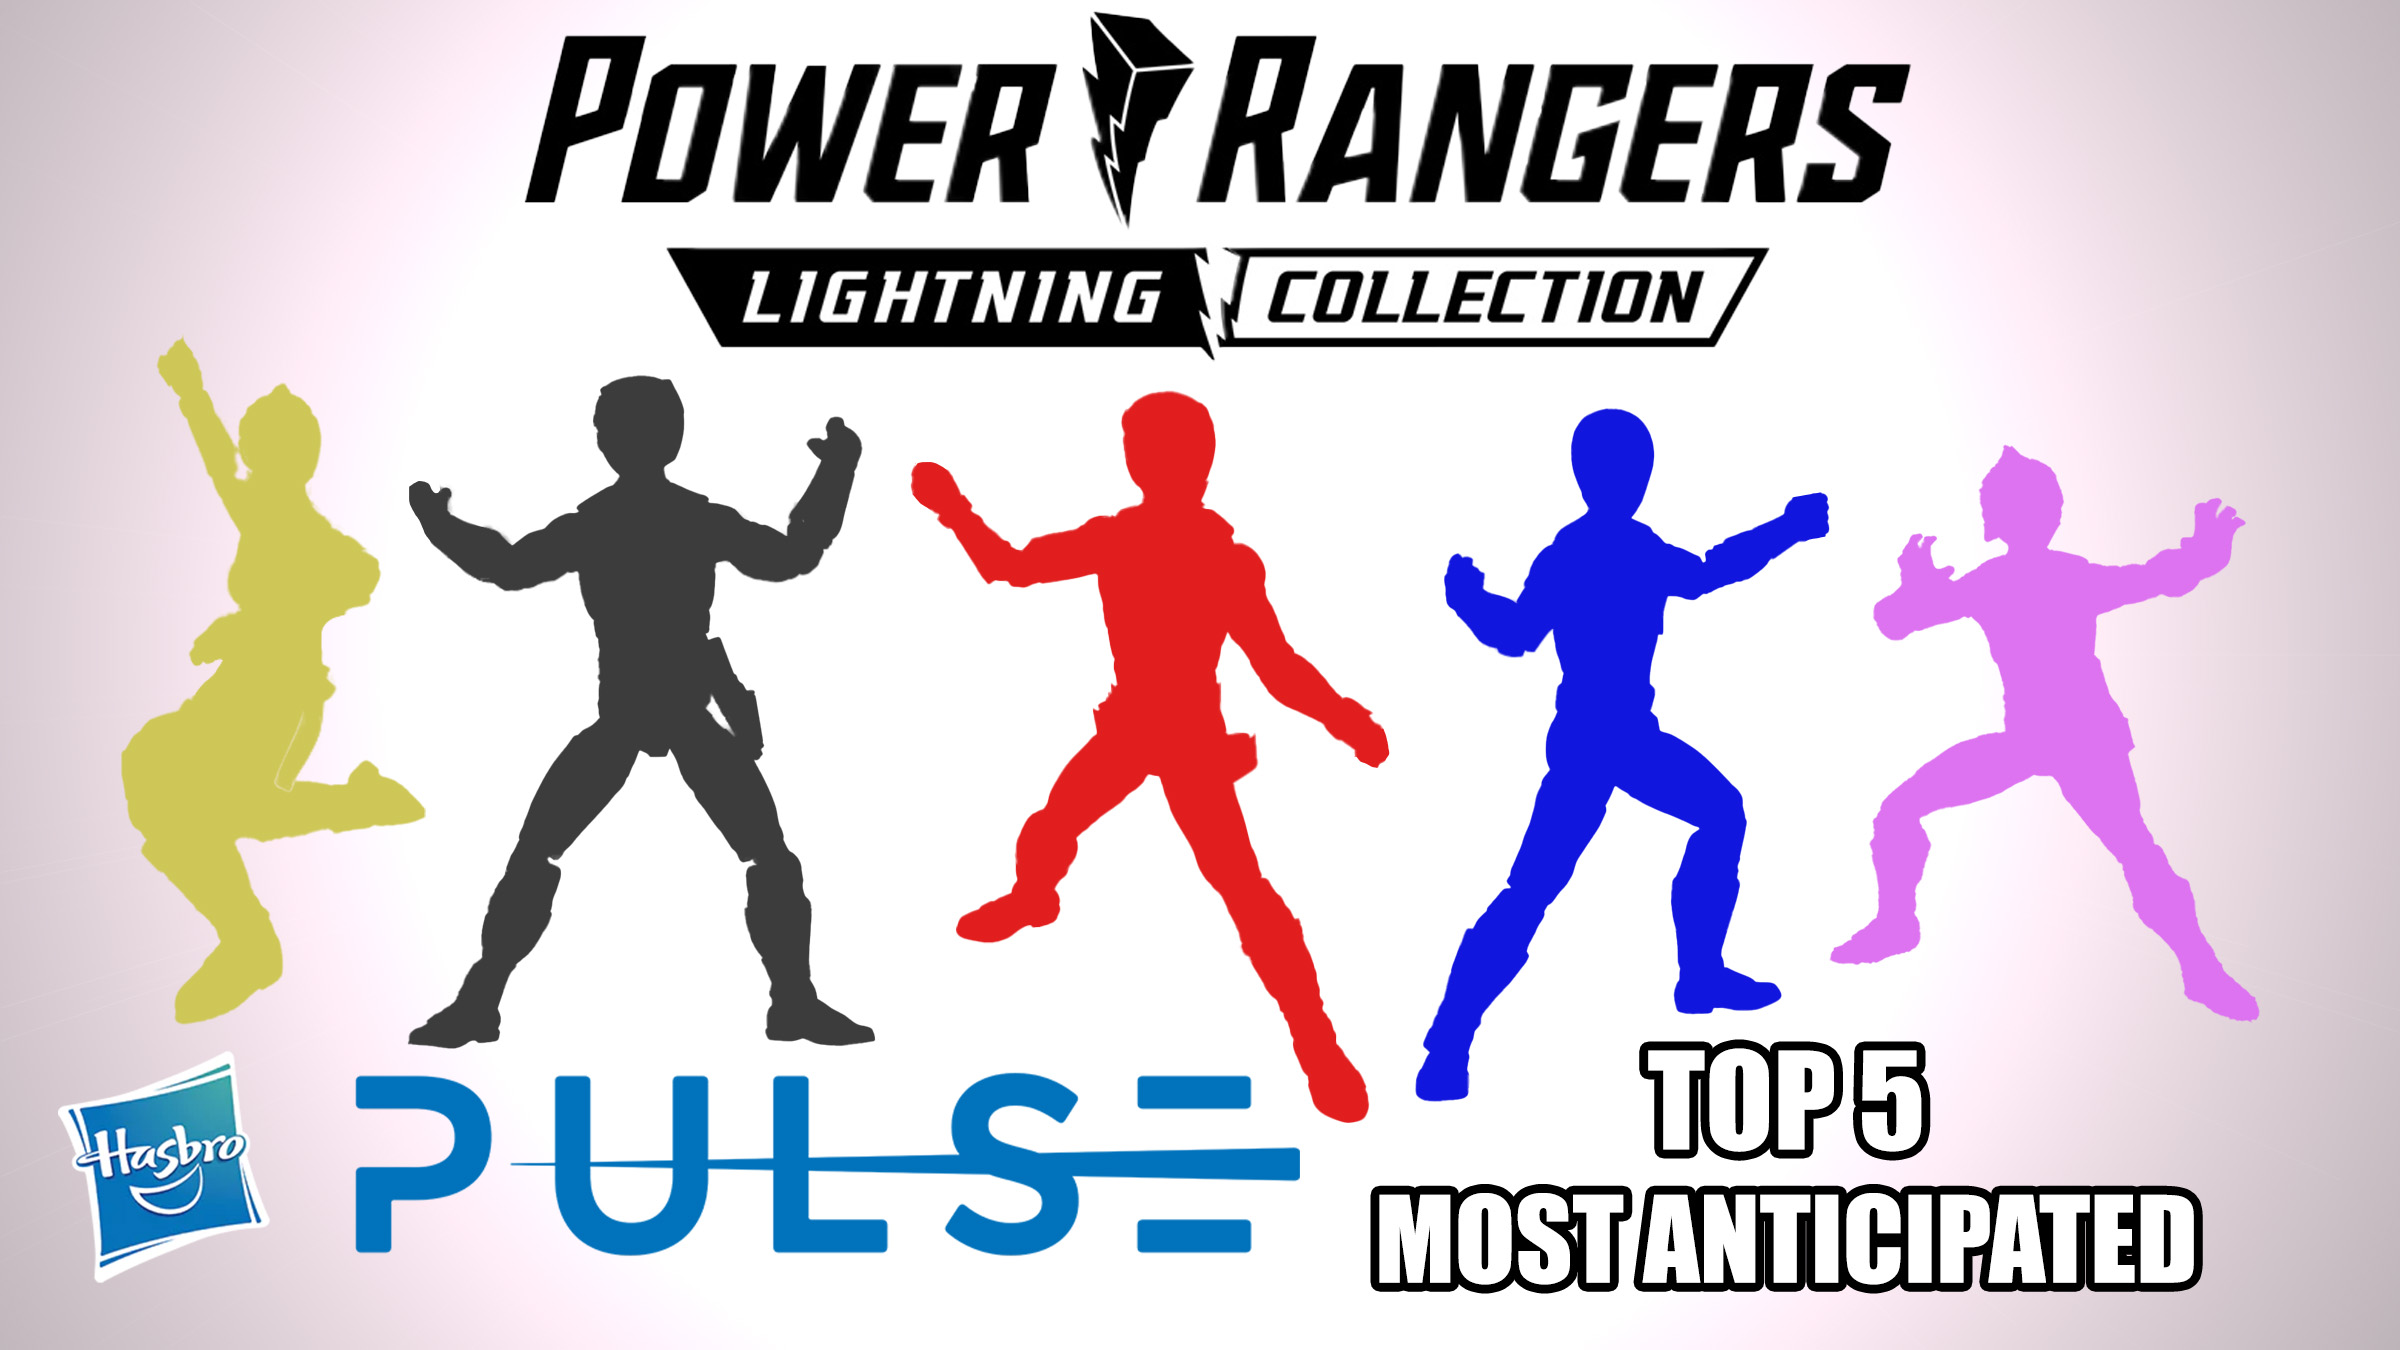 Power Rangers lightning collection